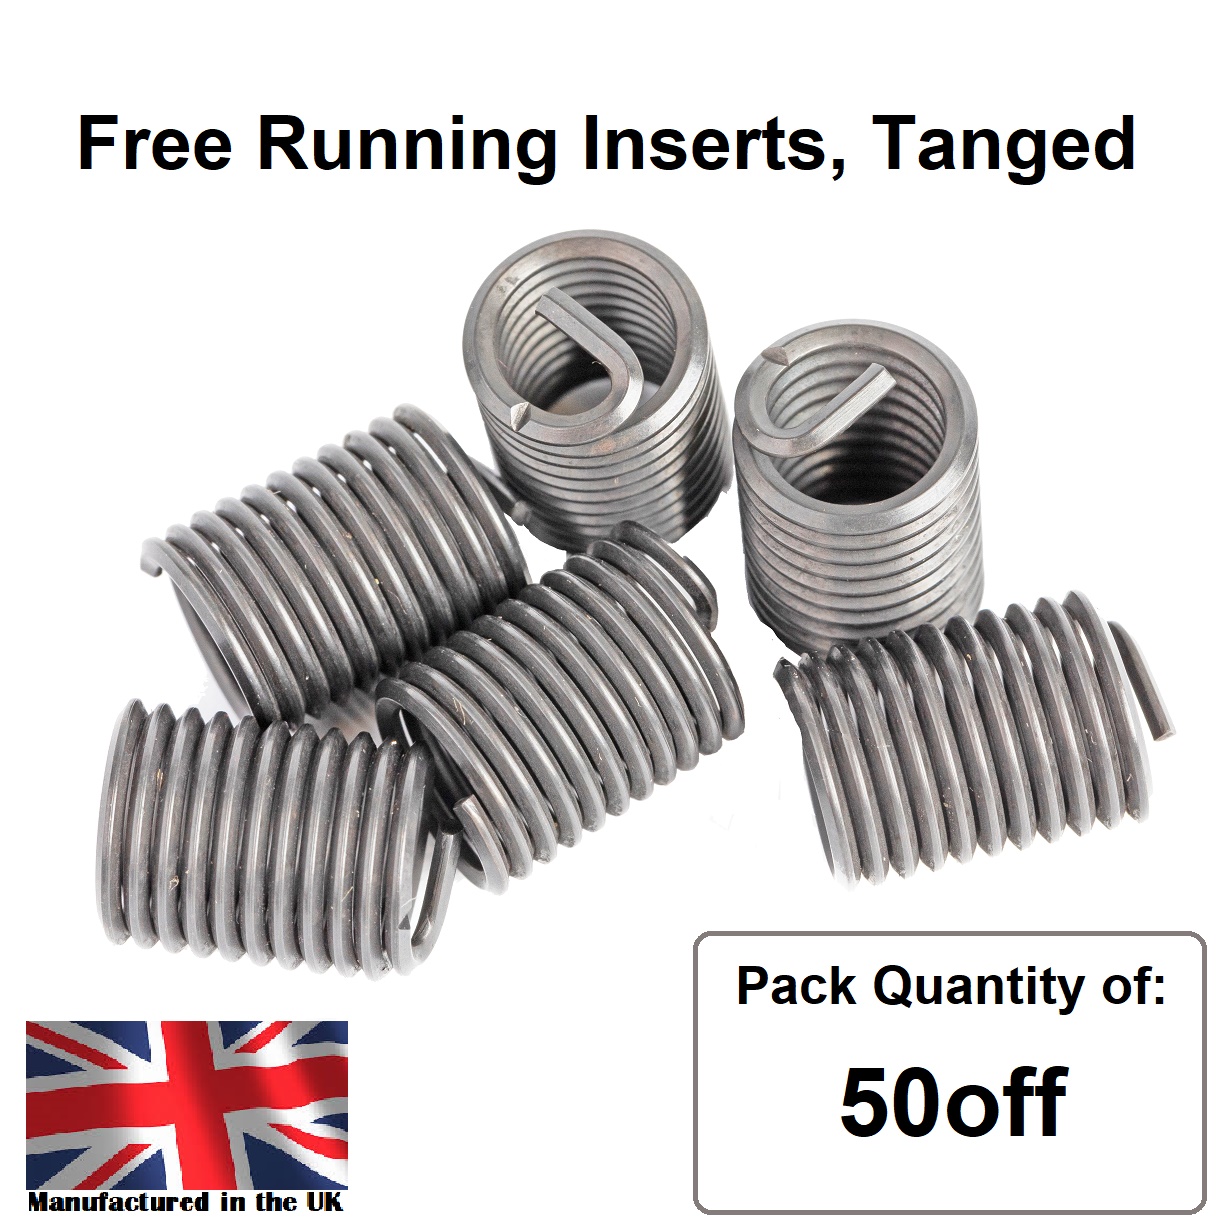 6-32 x 1.5D UNC, Free Running, Tanged, Wire Thread Repair Insert, 304/A2 Stainless (Pack 50)